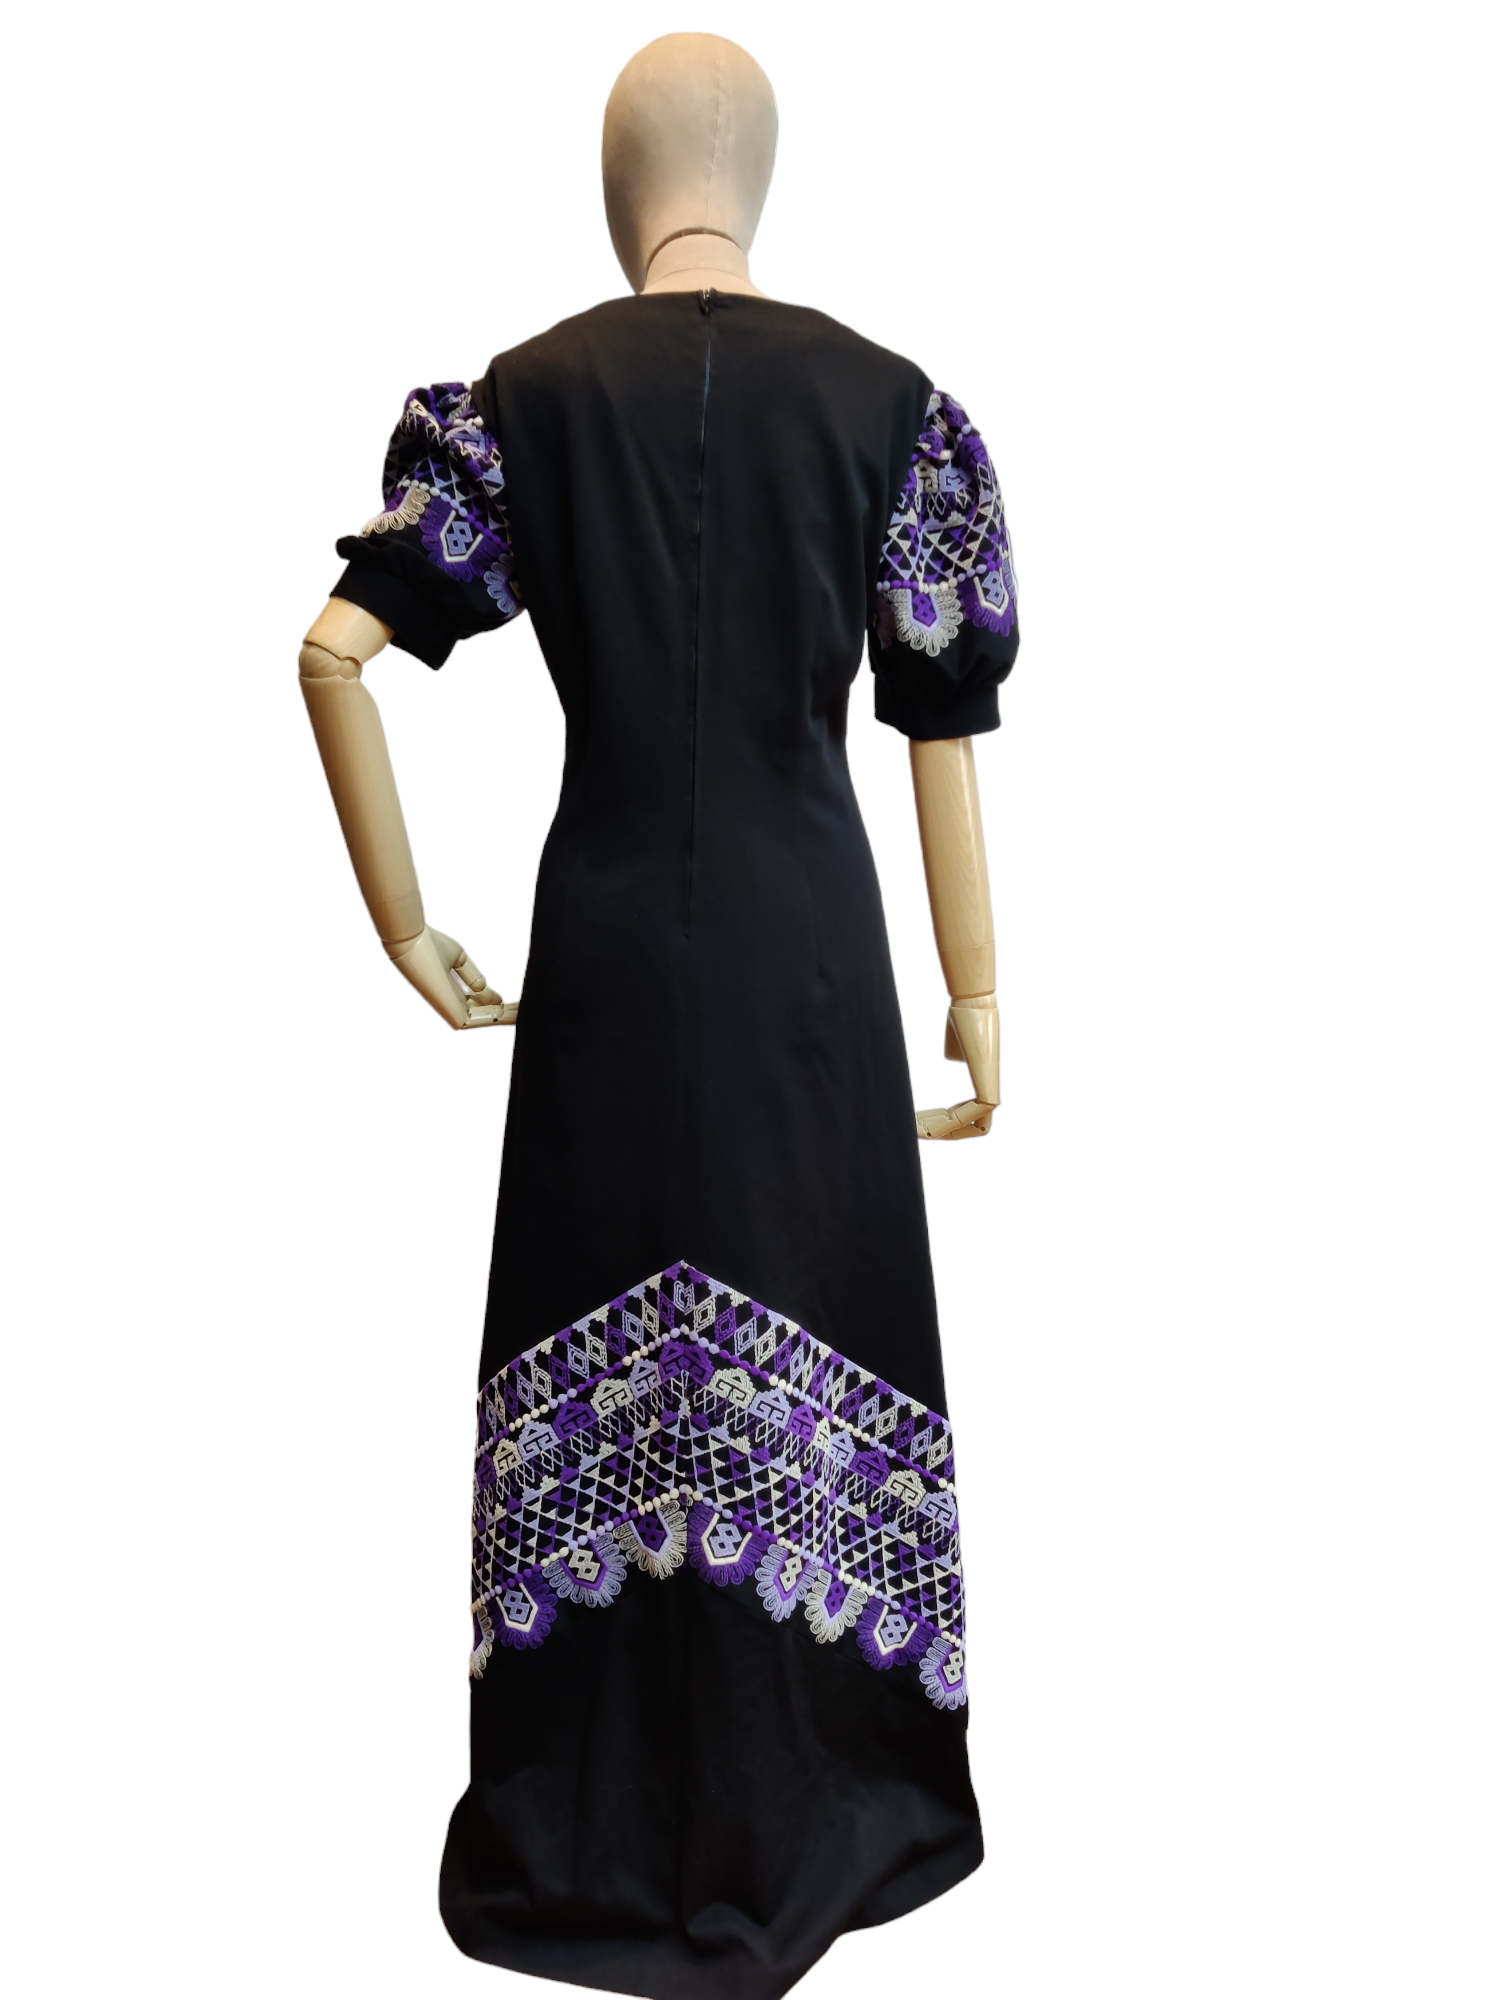 Beautiful vintage maxi dress in black with purple embroidery.